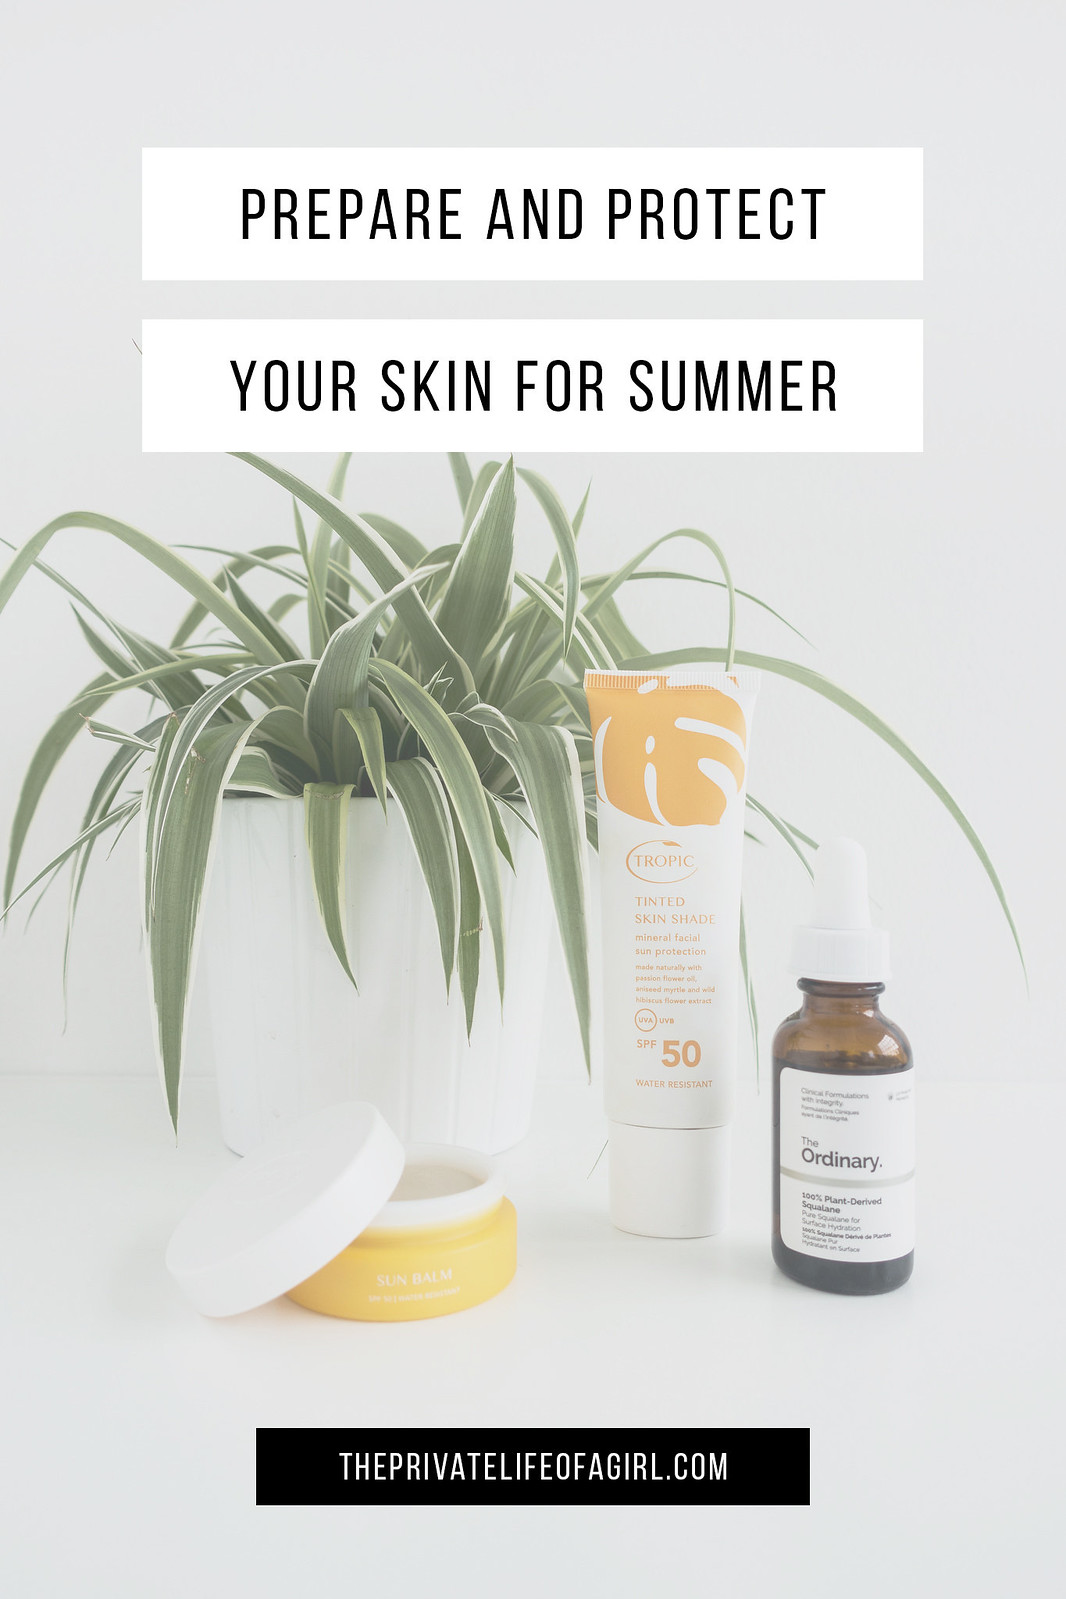 3 Steps To Prepare and Protect Your Skin In Summer Sun